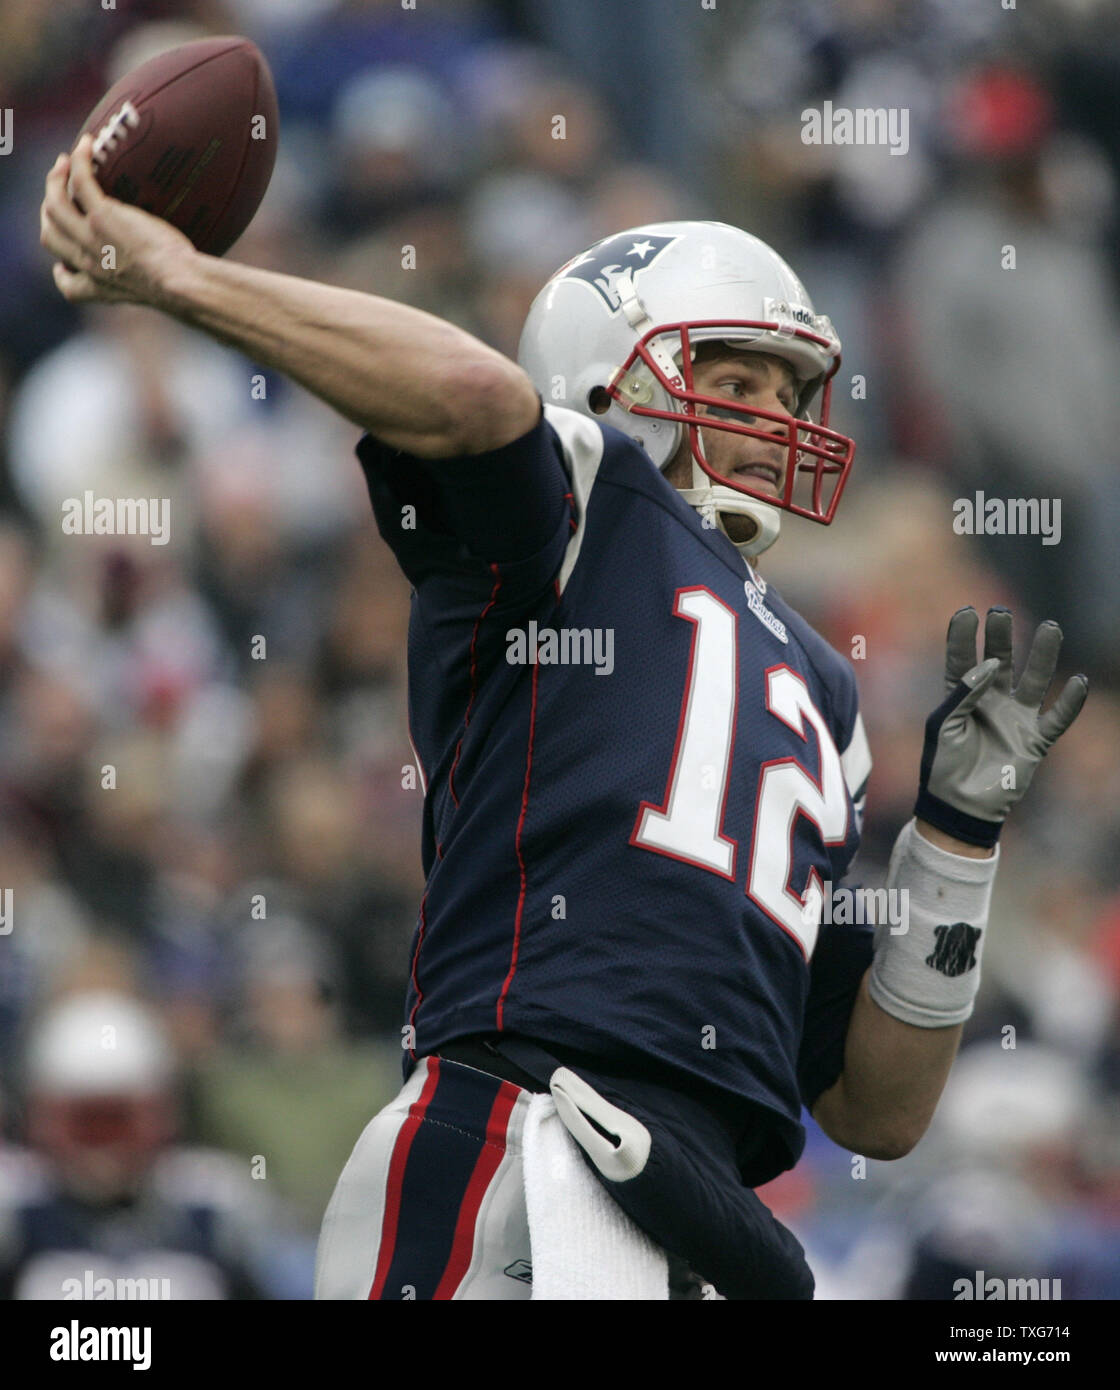 New England Patriots quarterback Tom Brady throws the ball against the Miami Dolphins in the first quarter at Gillette Stadium in Foxboro, Massachusetts on January 2, 2011.    UPI/Matthew Healey Stock Photo